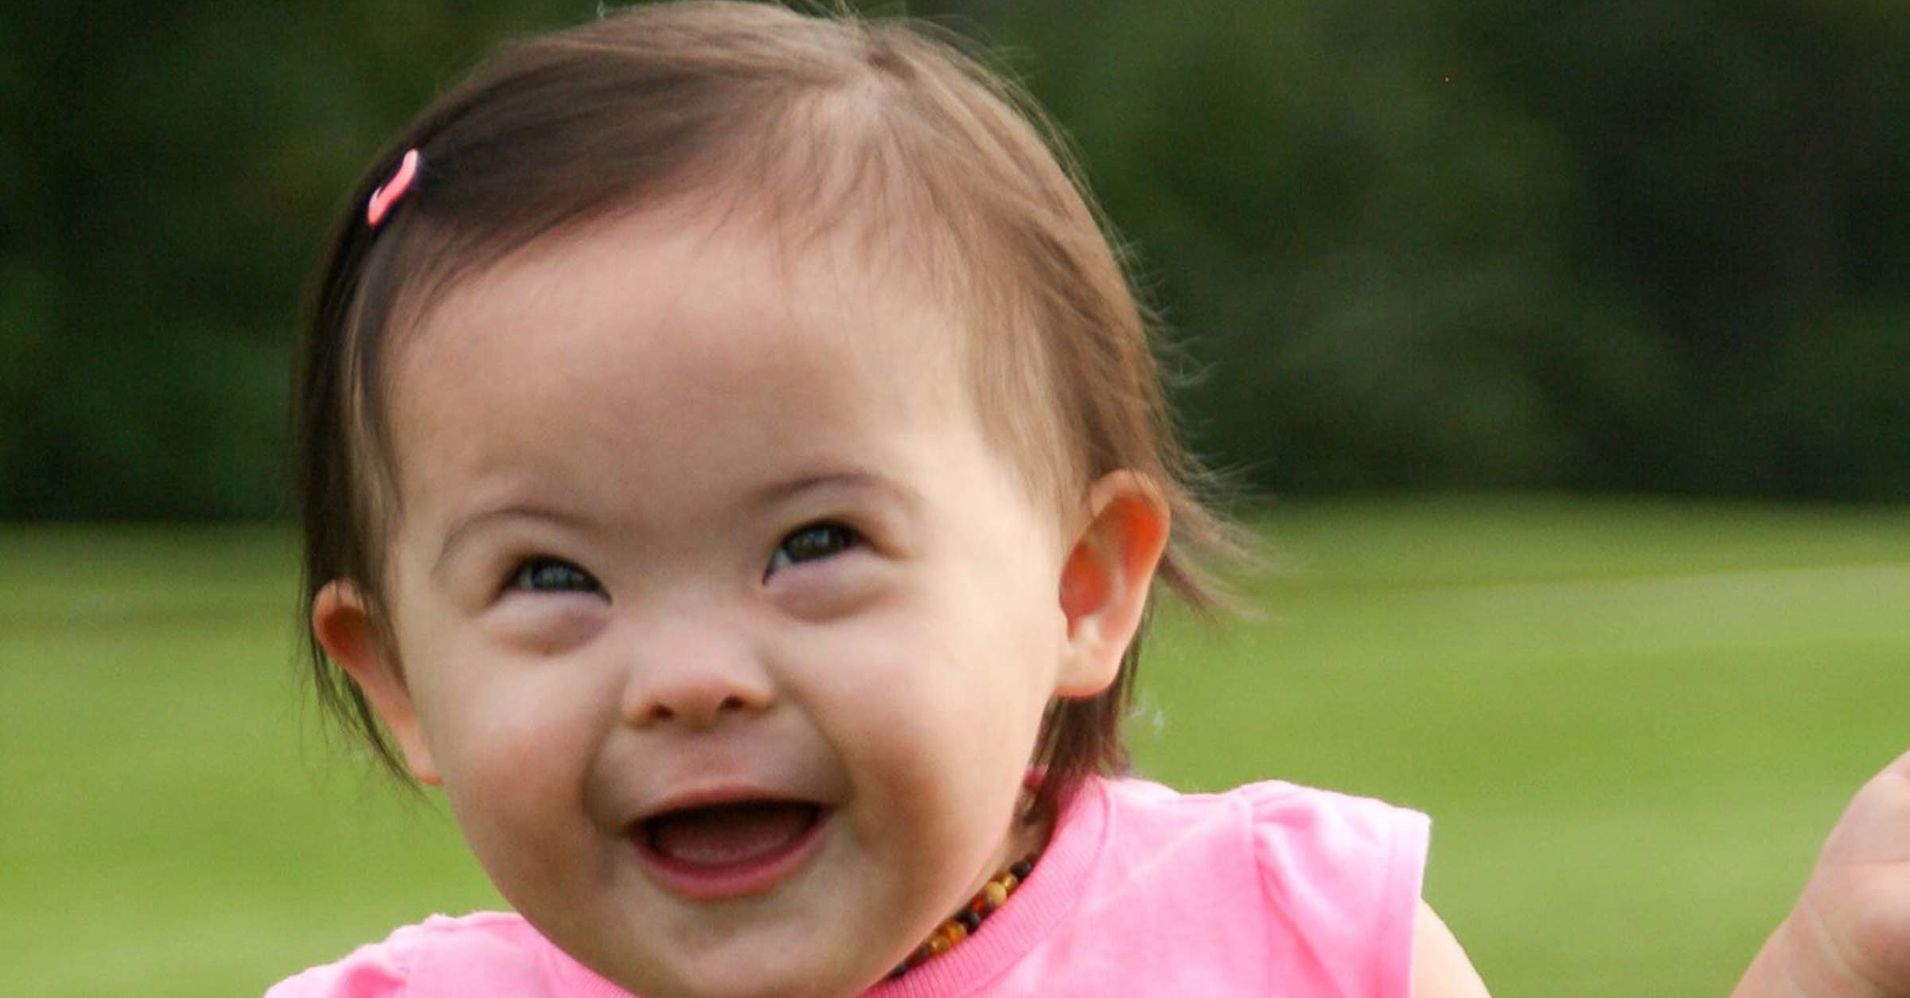 48 Parents Of Kids With Down Syndrome Share What They Wish You Knew